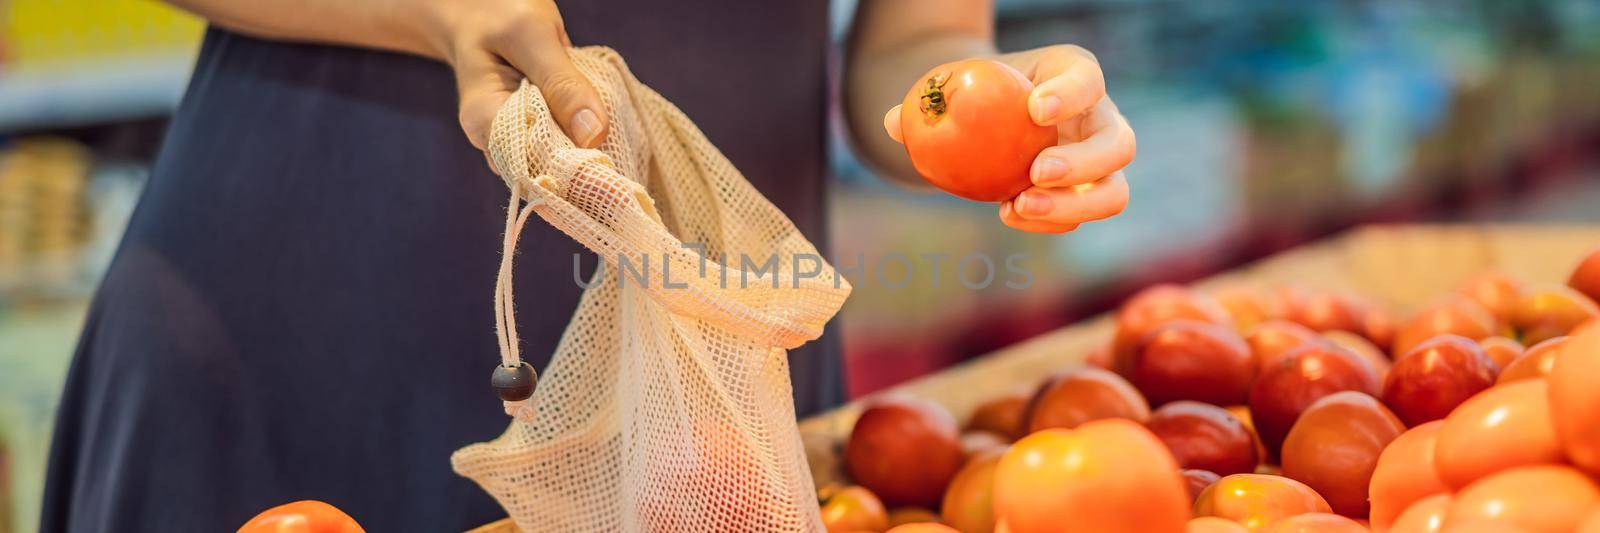 A woman chooses tomatoes in a supermarket without using a plastic bag. Reusable bag for buying vegetables. Zero waste concept BANNER, LONG FORMAT by galitskaya